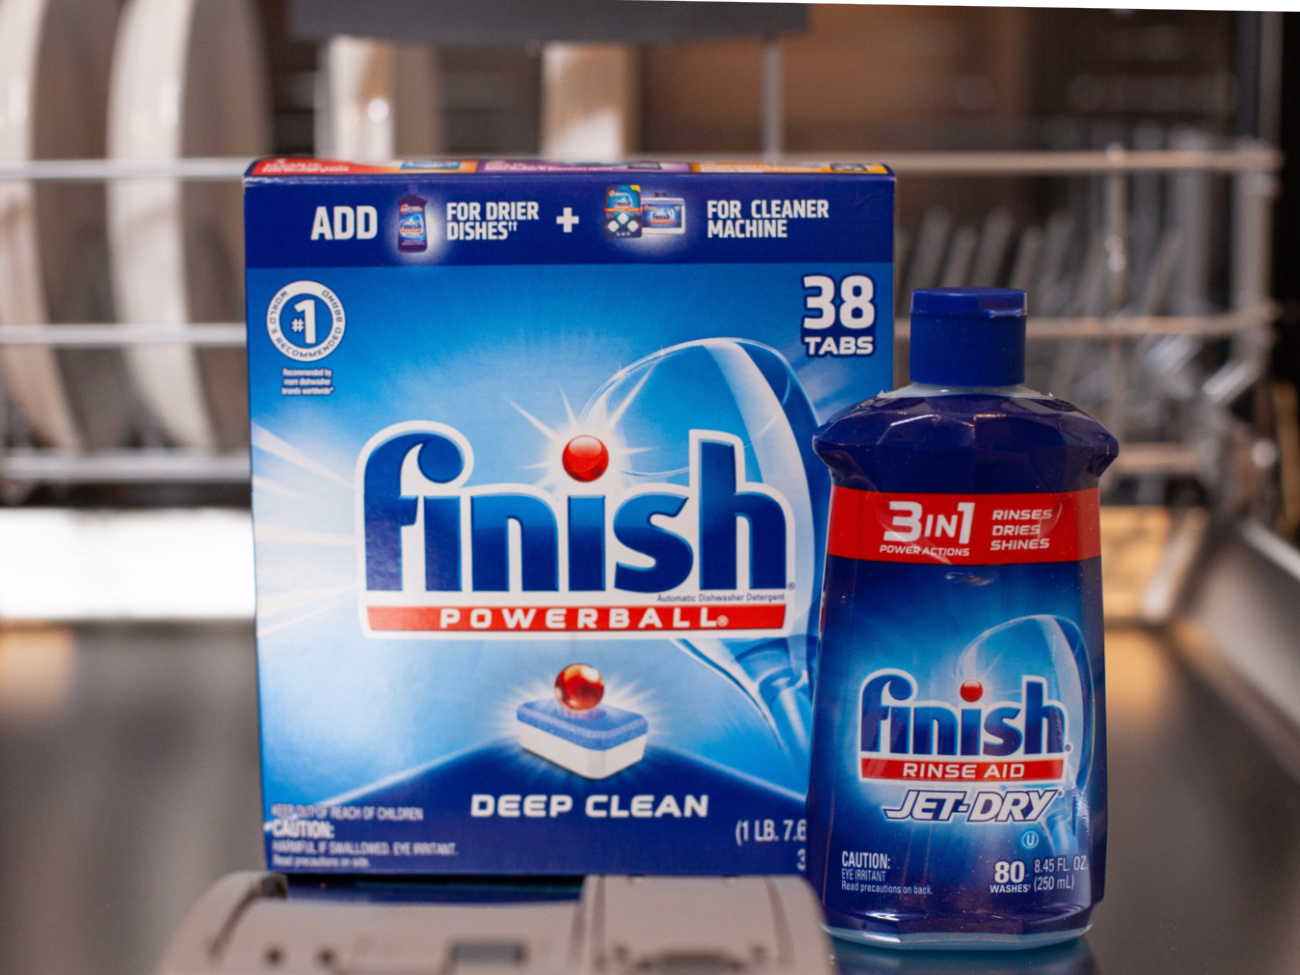 Finish Dishwasher Detergent As Low As $3.49 At Publix (Plus $3.99 Jet-Dry Rinse Aid)